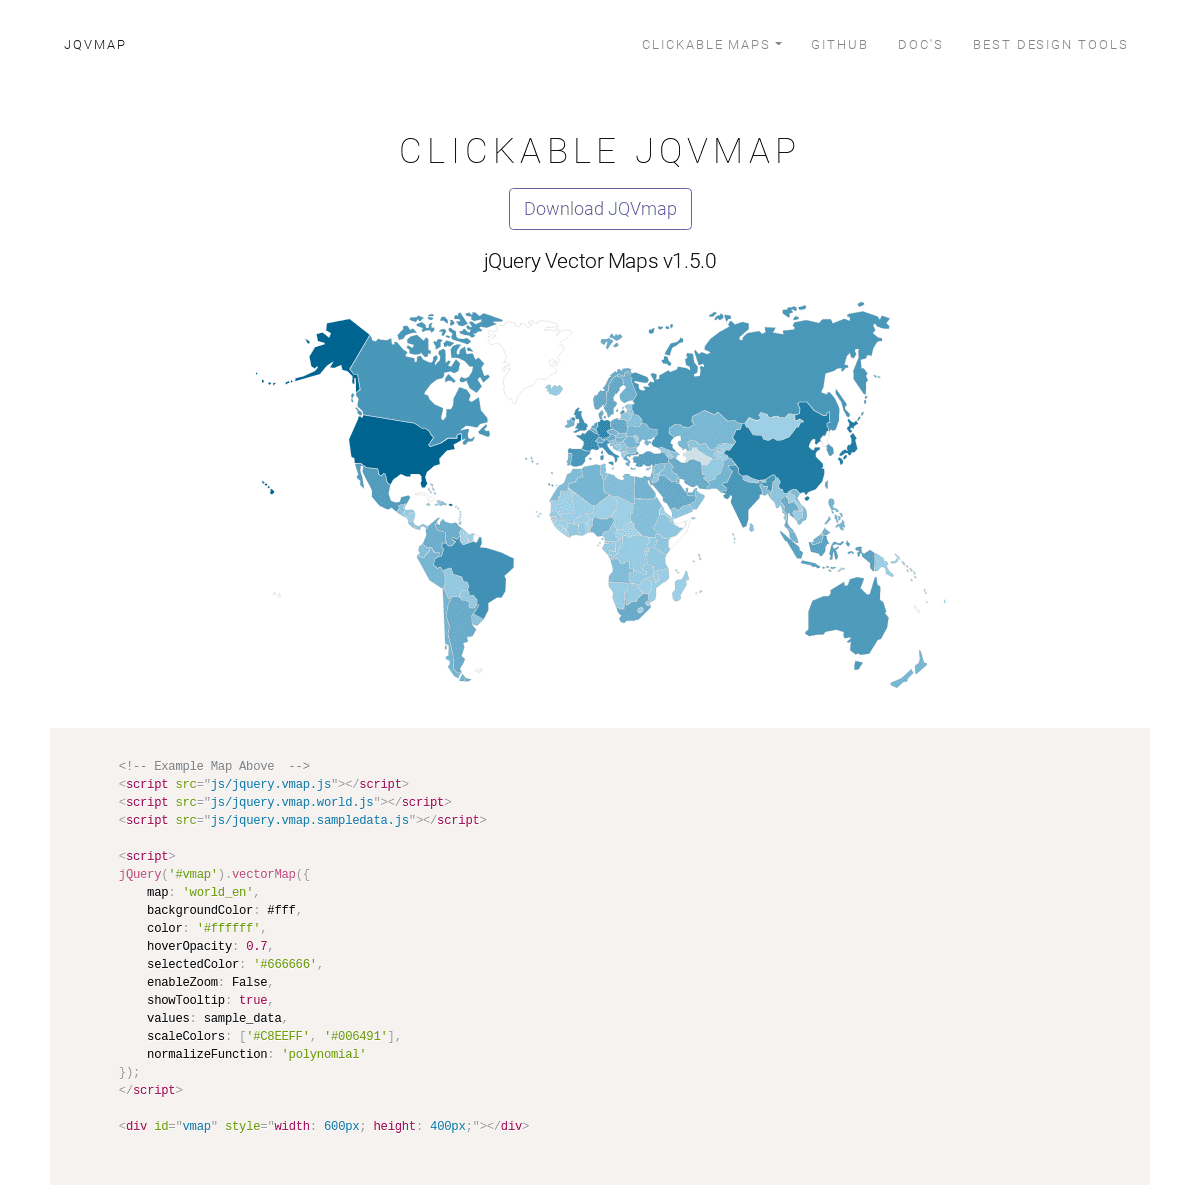 A complete backup of https://jqvmap.com